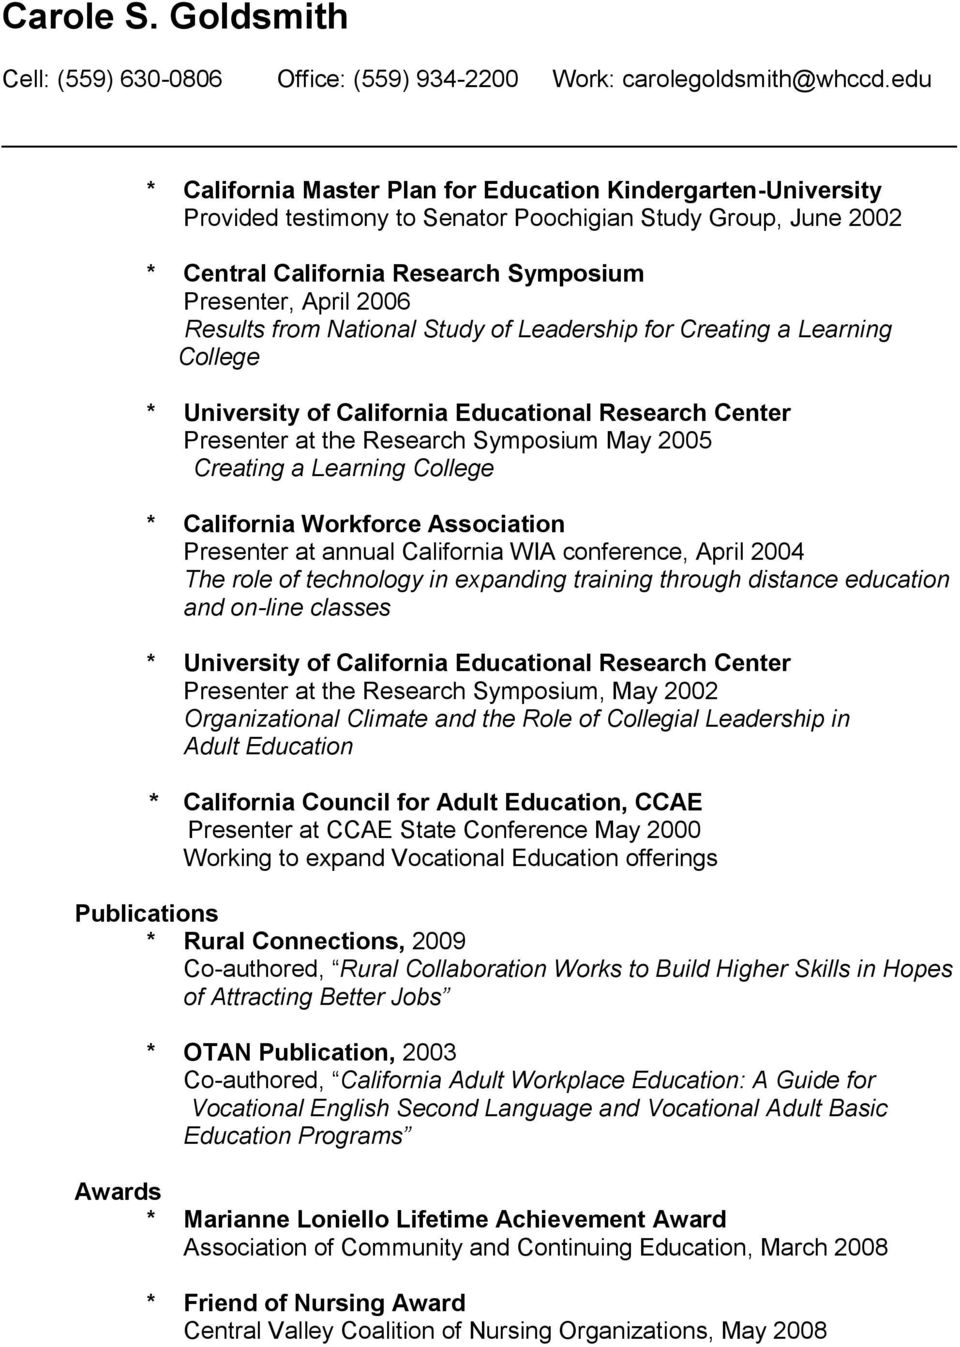 California Workforce Association Presenter at annual California WIA conference, April 2004 The role of technology in expanding training through distance education and on-line classes * University of